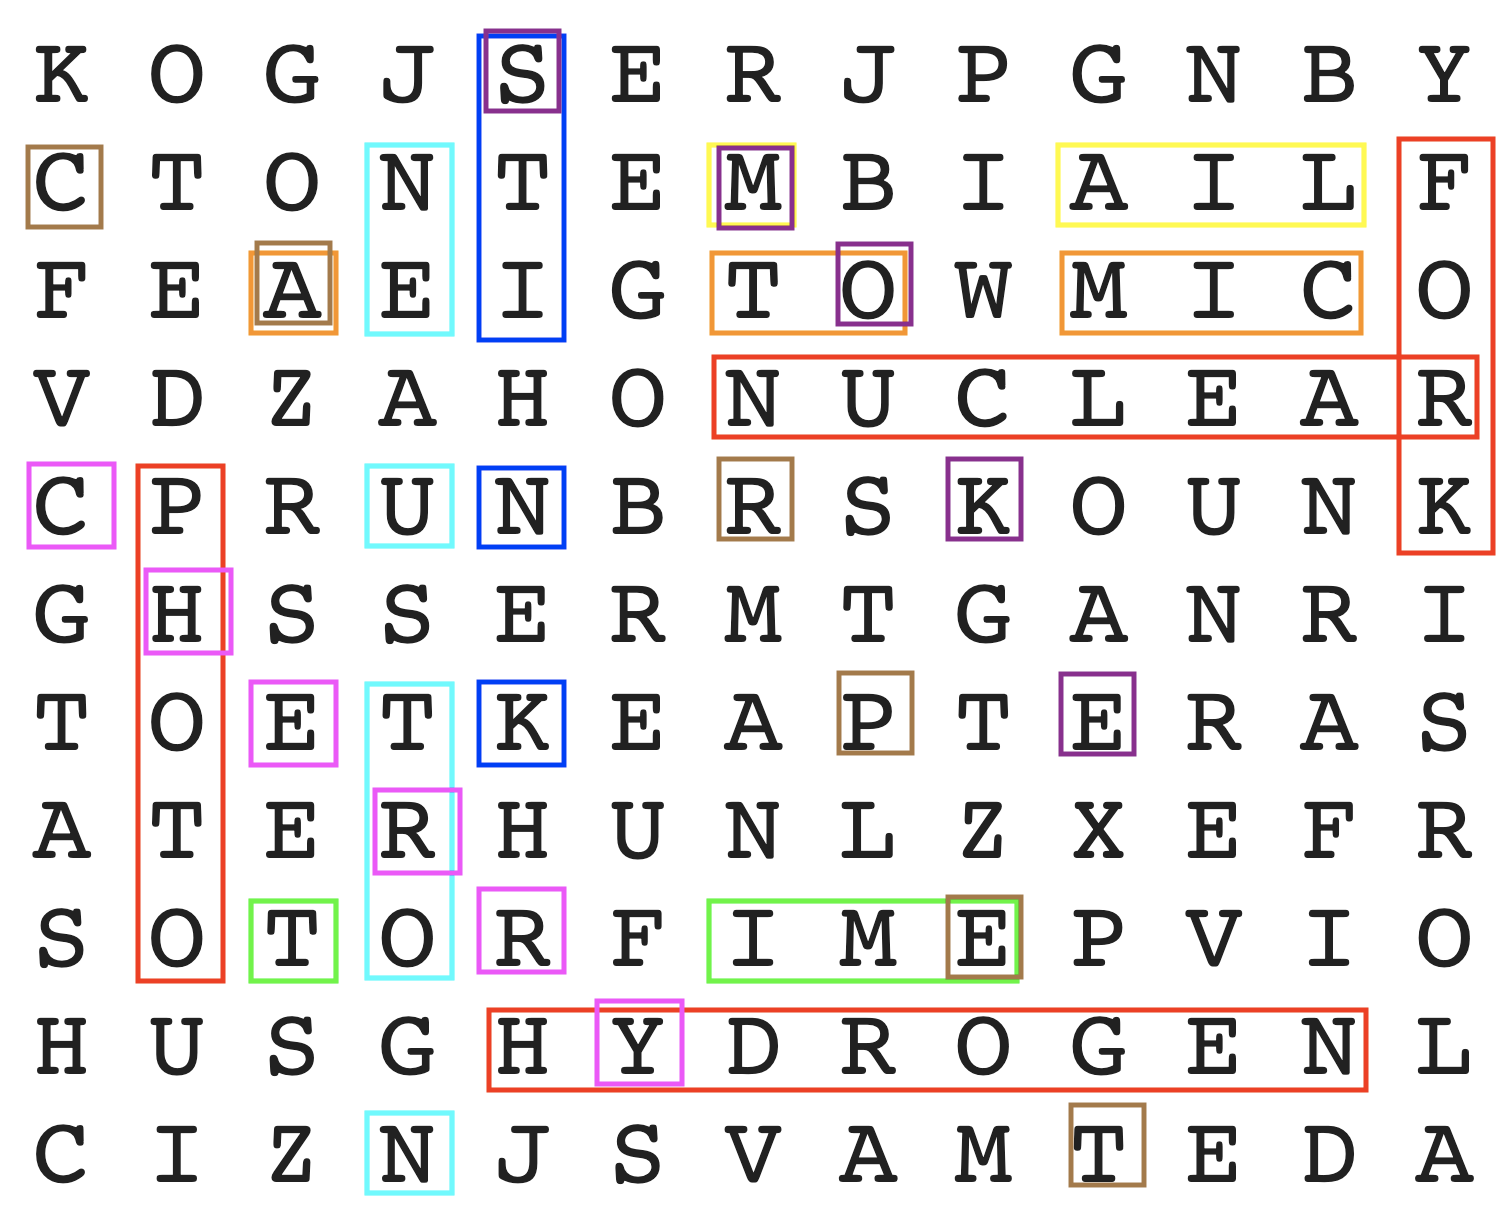 Initial word search grid